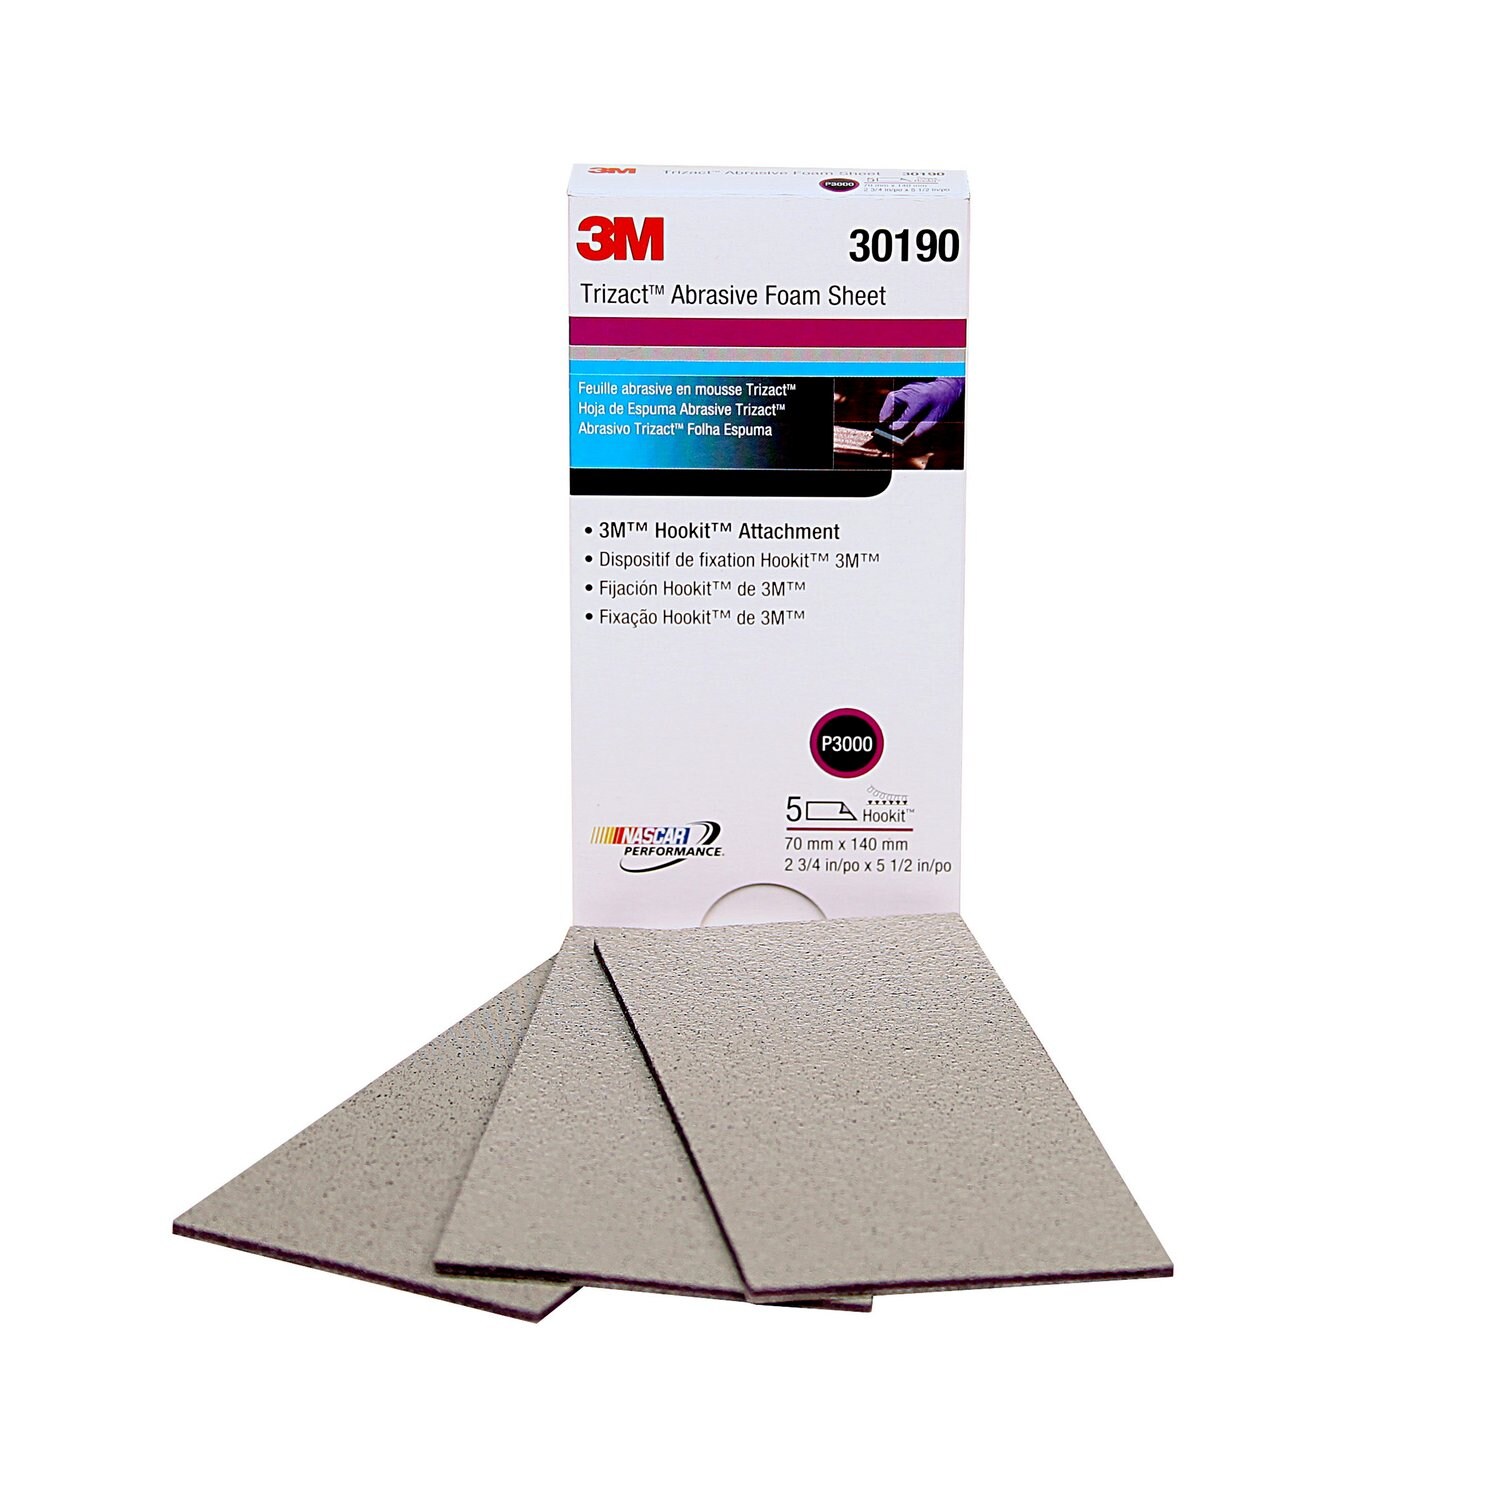 Skin Tac Adhesive Barrier Wipes - 50 ct Per Box - Pack of 2 Boxes